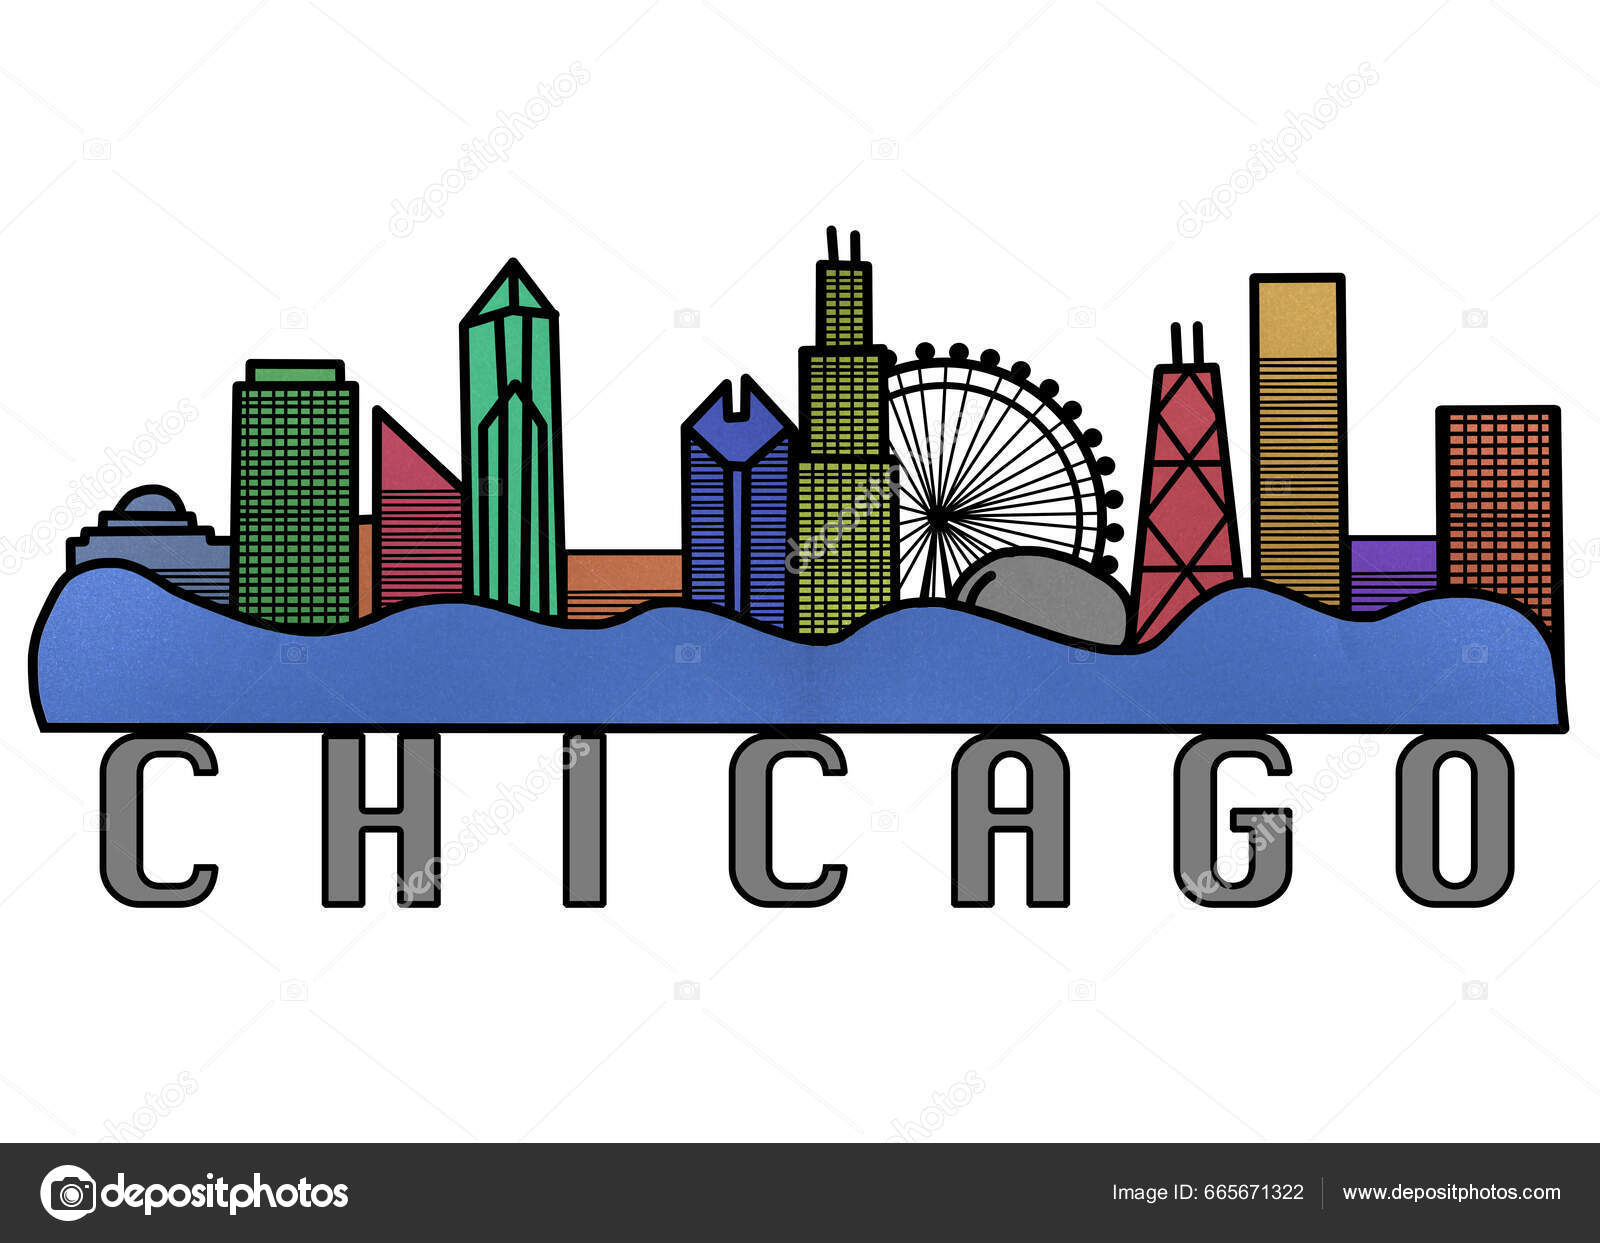 Drawings of Chicago 